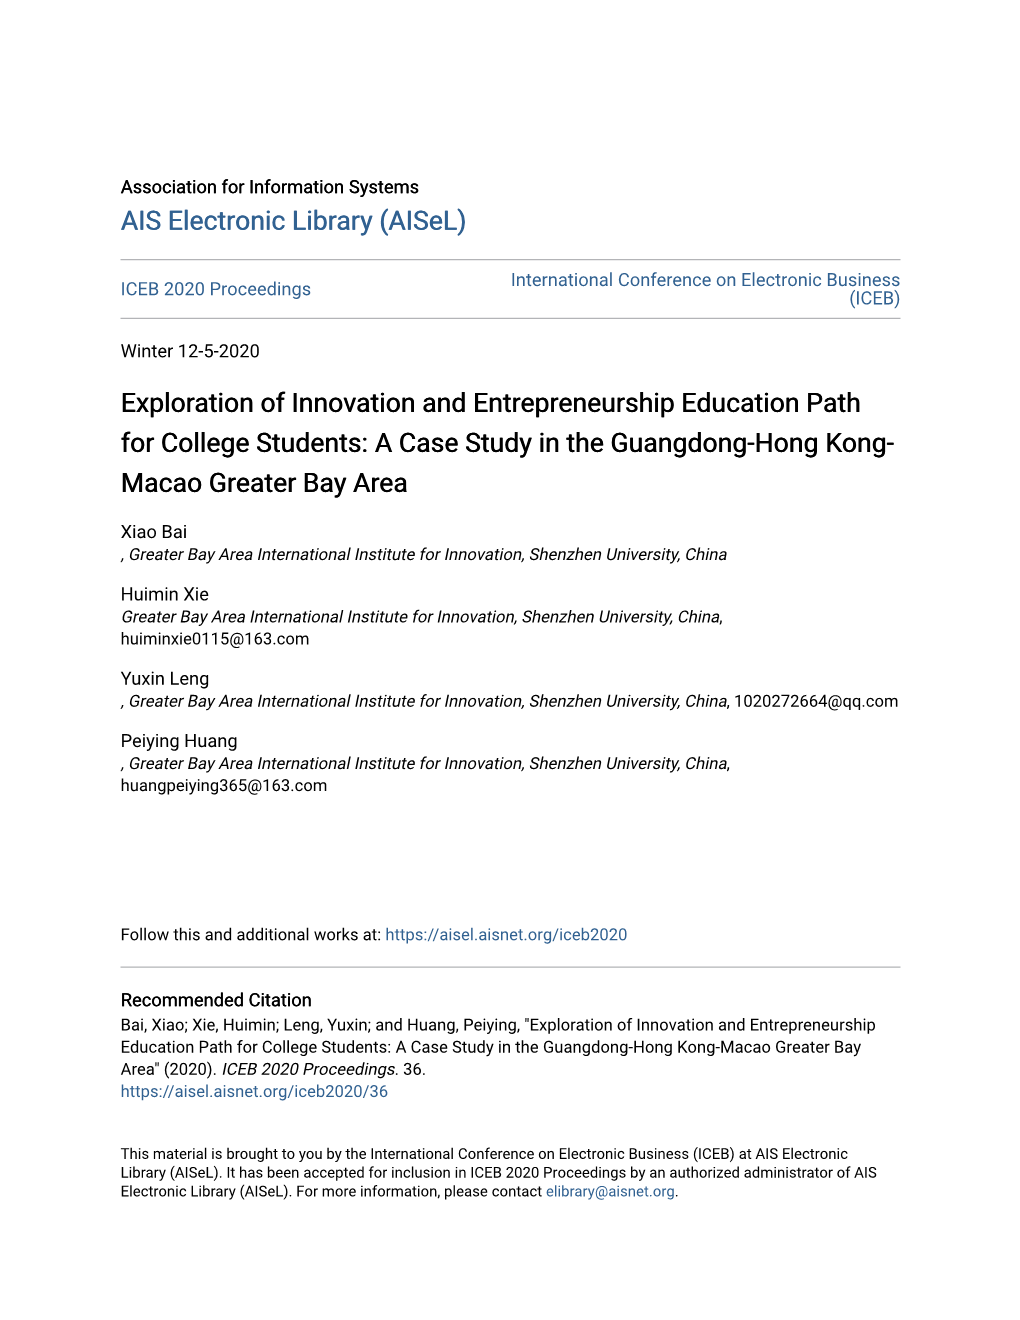 Exploration of Innovation and Entrepreneurship Education Path for College Students: a Case Study in the Guangdong-Hong Kong-Macao Greater Bay Area" (2020)